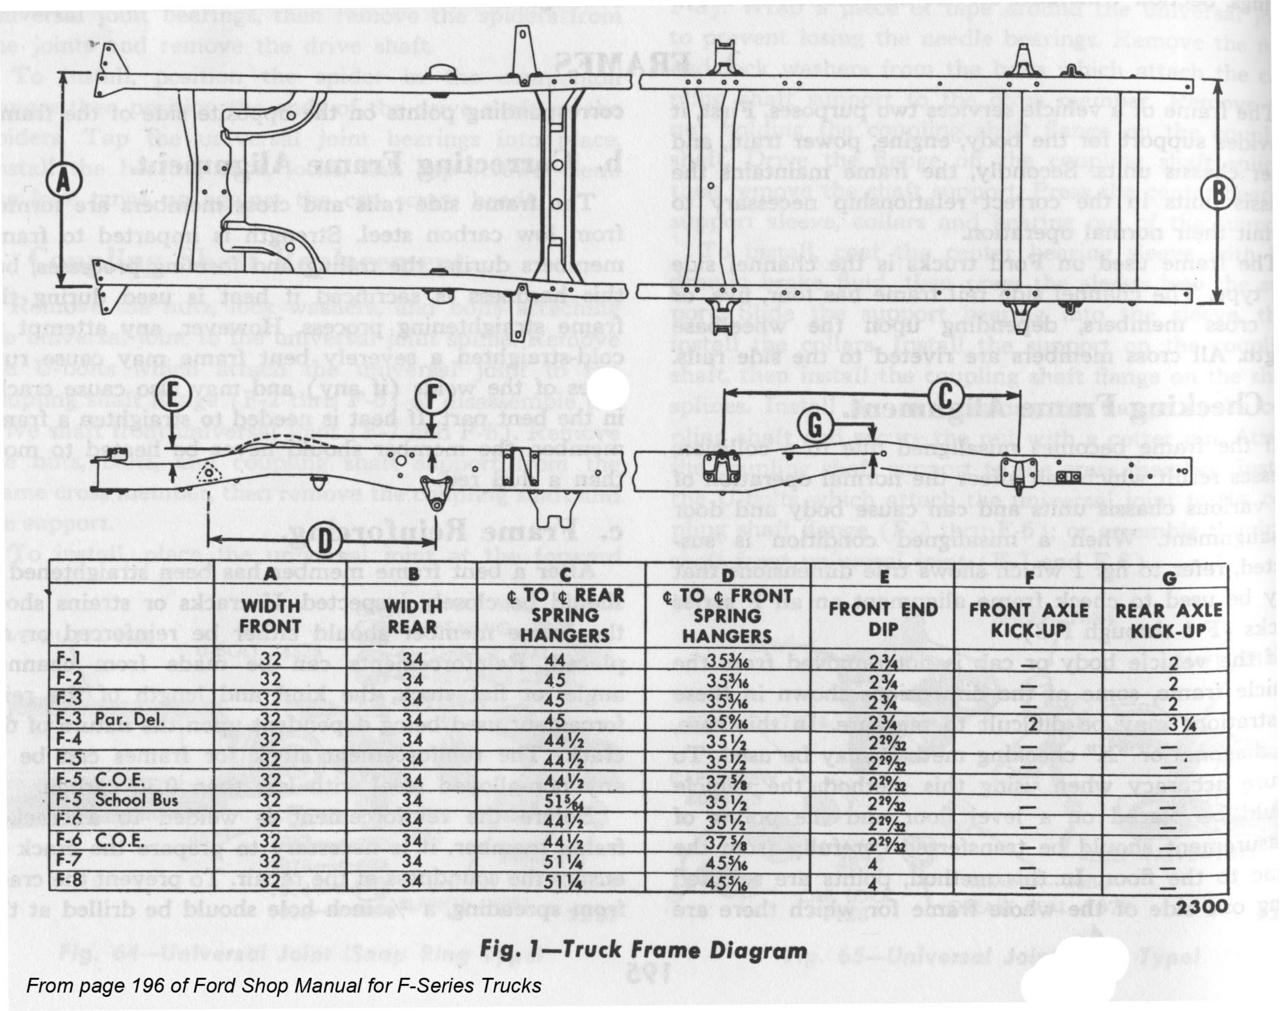 1950 Ford frame dimensions #3